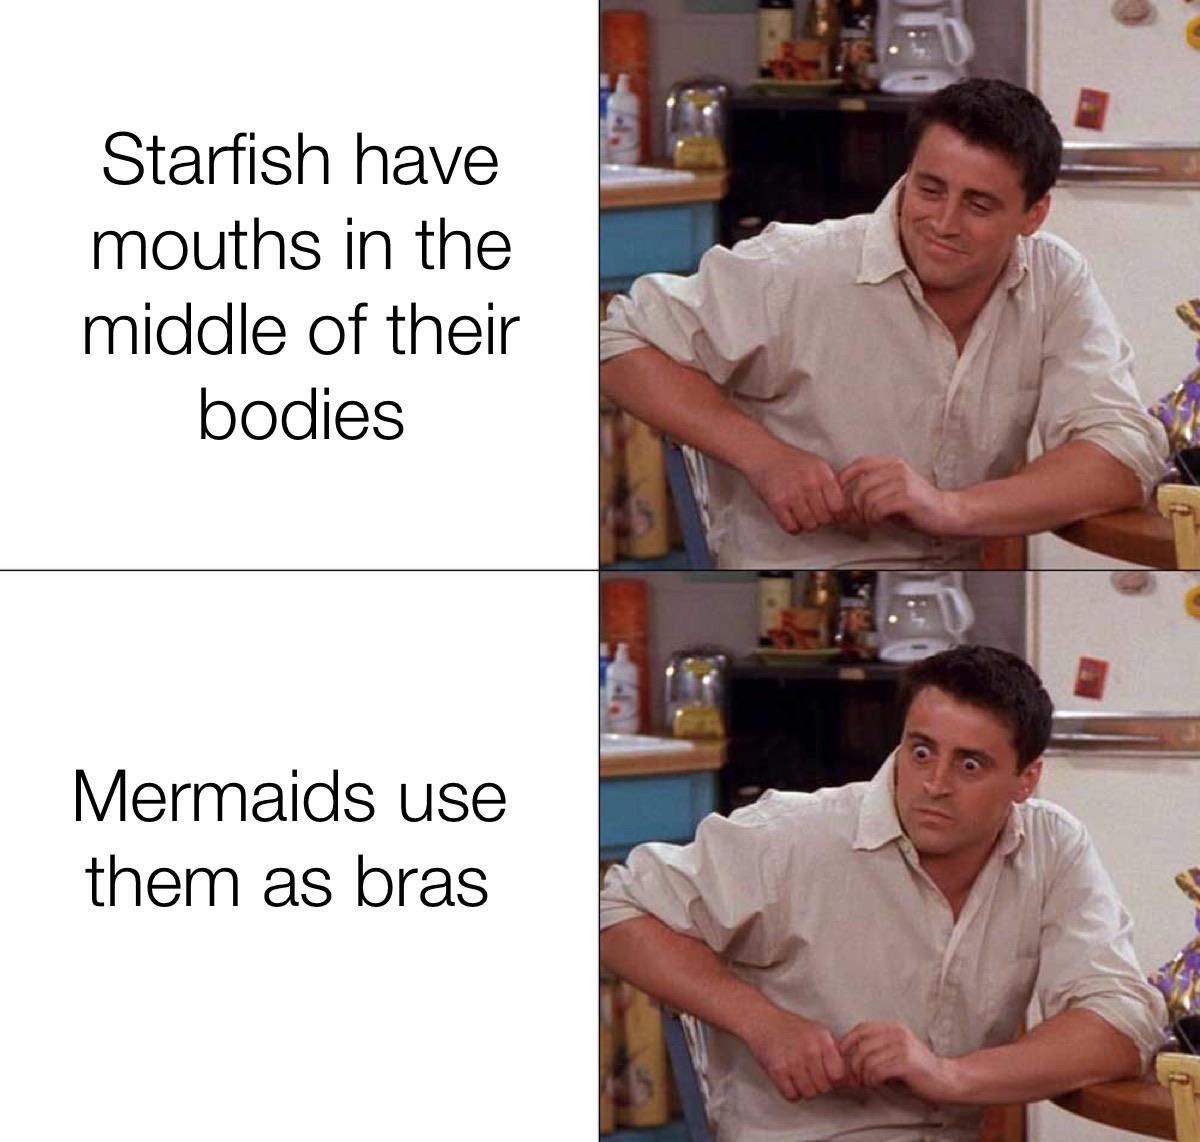 joey shocked meme - Starfish have mouths in the middle of their bodies Mermaids use them as bras